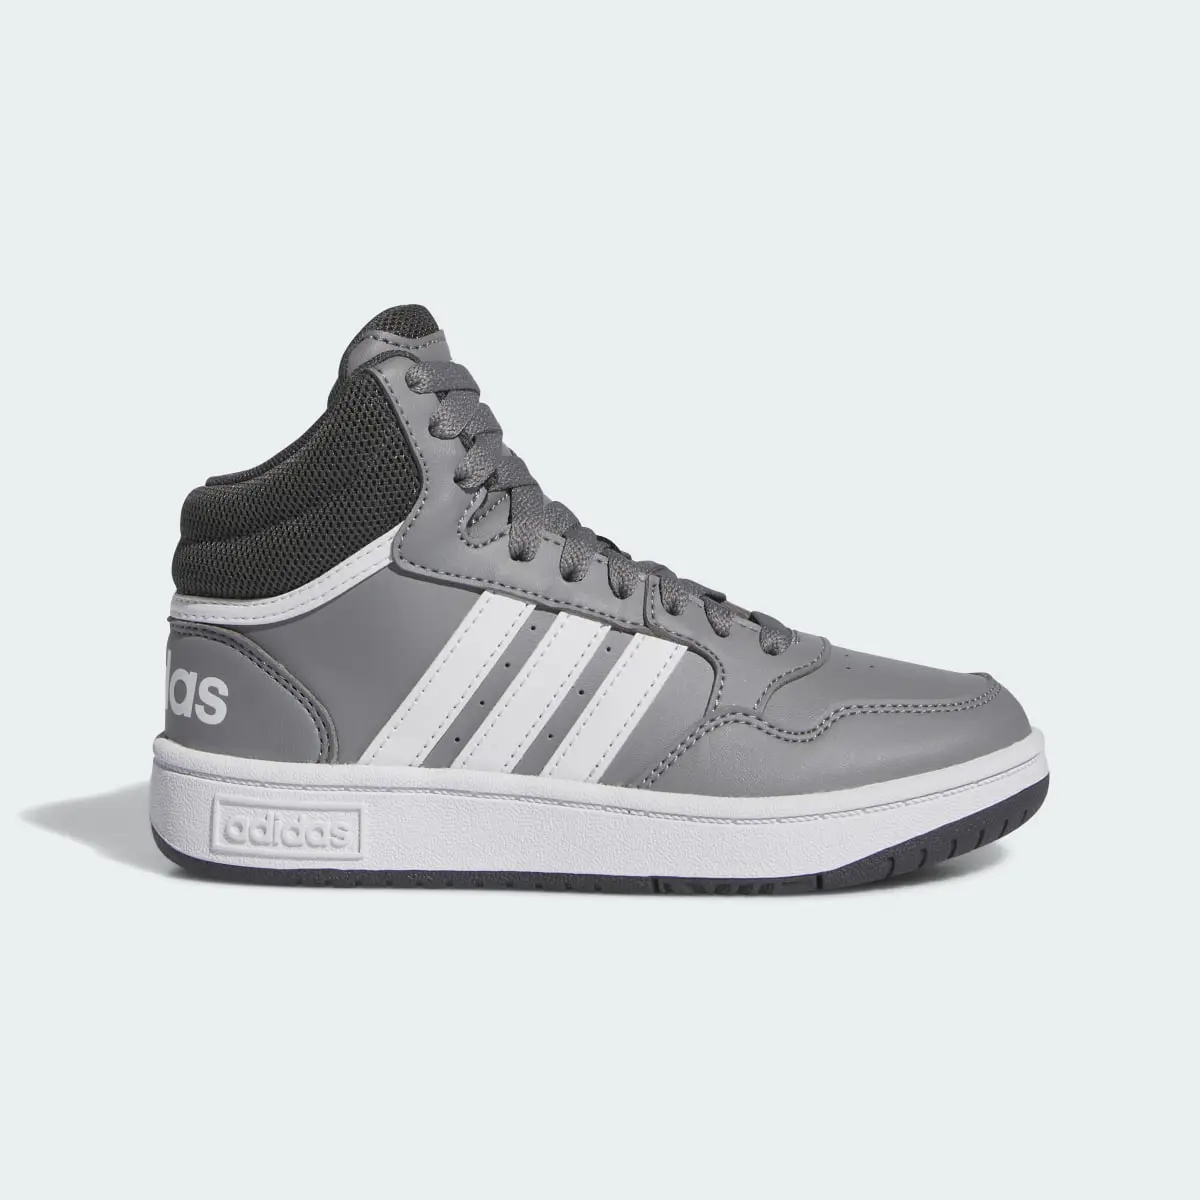 Adidas Hoops Mid Shoes. 2